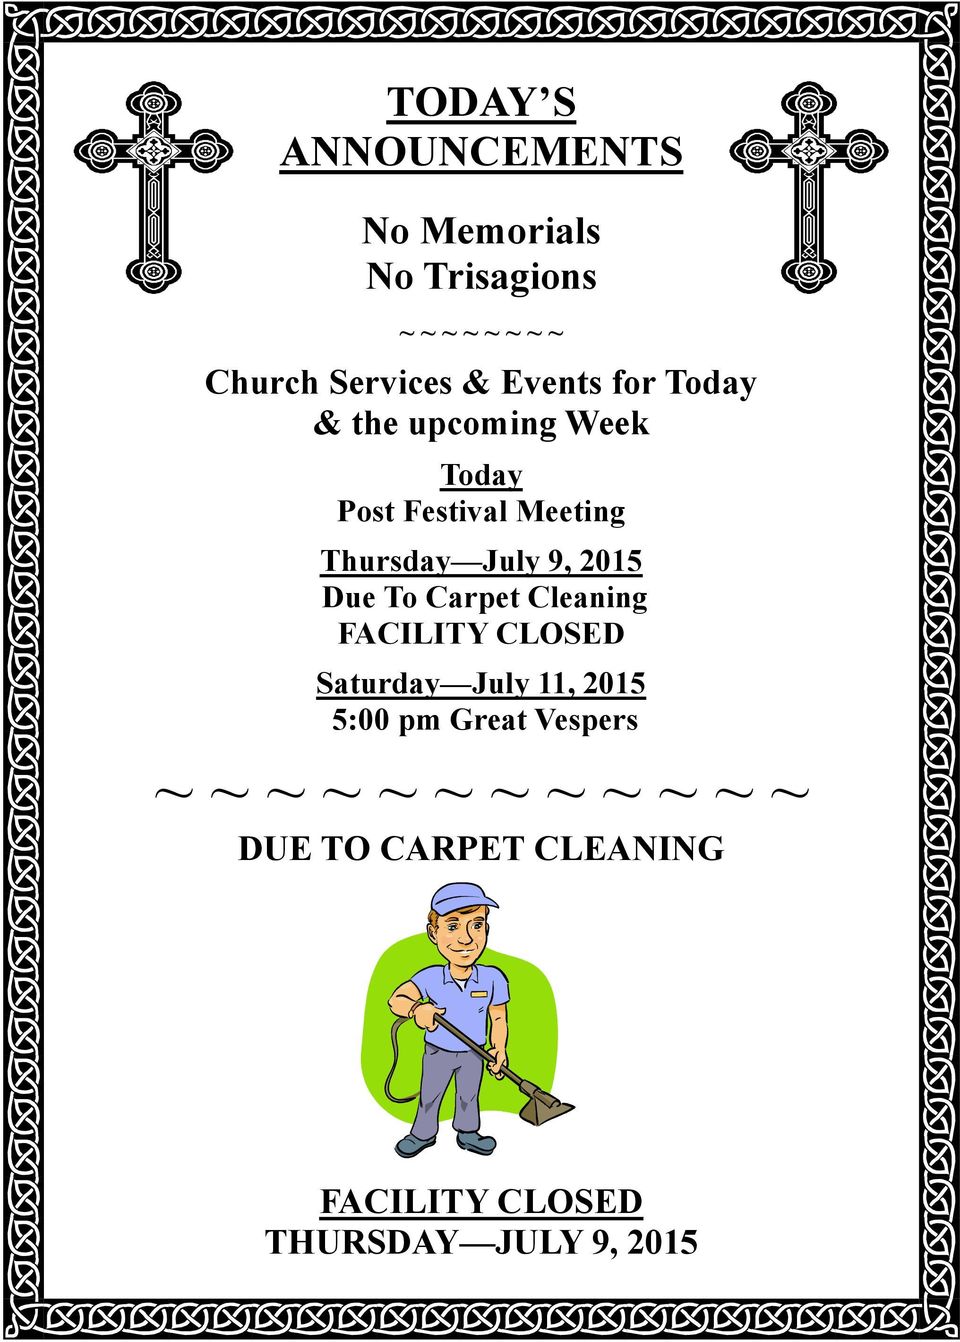 2015 Due To Carpet Cleaning FACILITY CLOSED Saturday July 11, 2015 5:00 pm Great